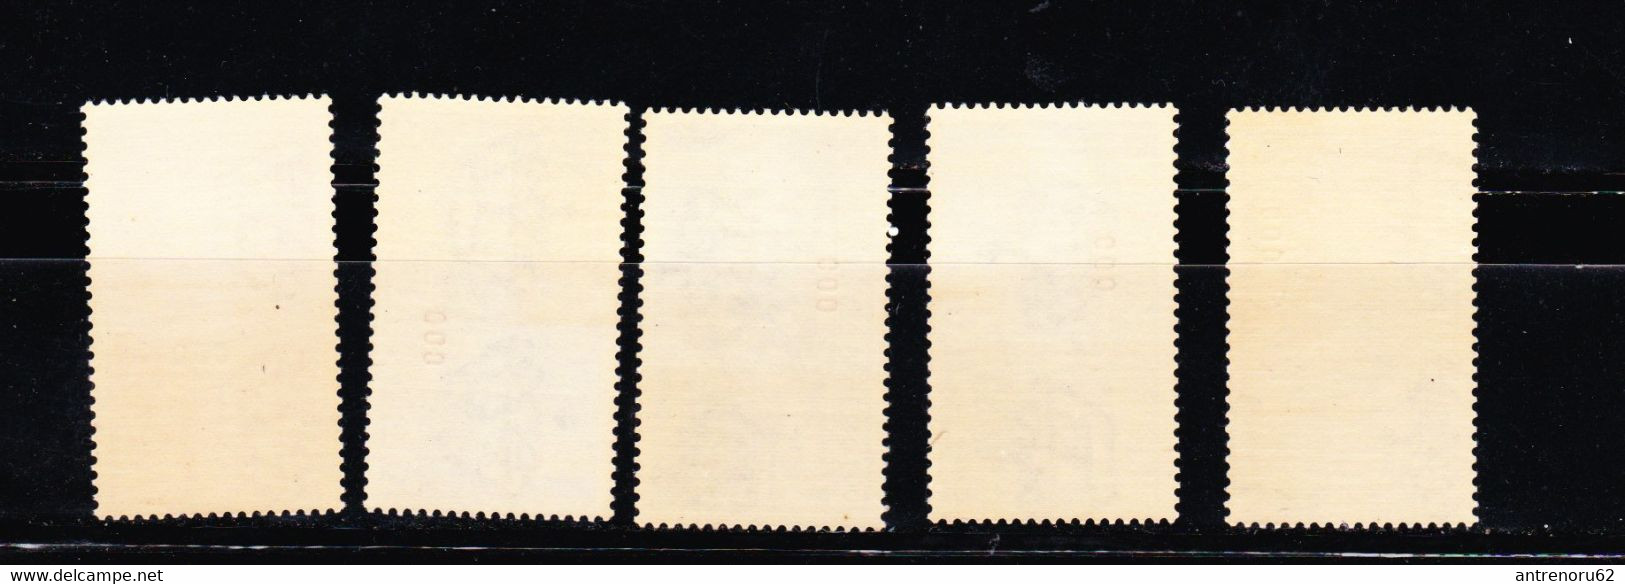 STAMPS-ITALY-COO-1930-UNUSED-MNH**-SEE-SCAN - Ägäis (Coo)